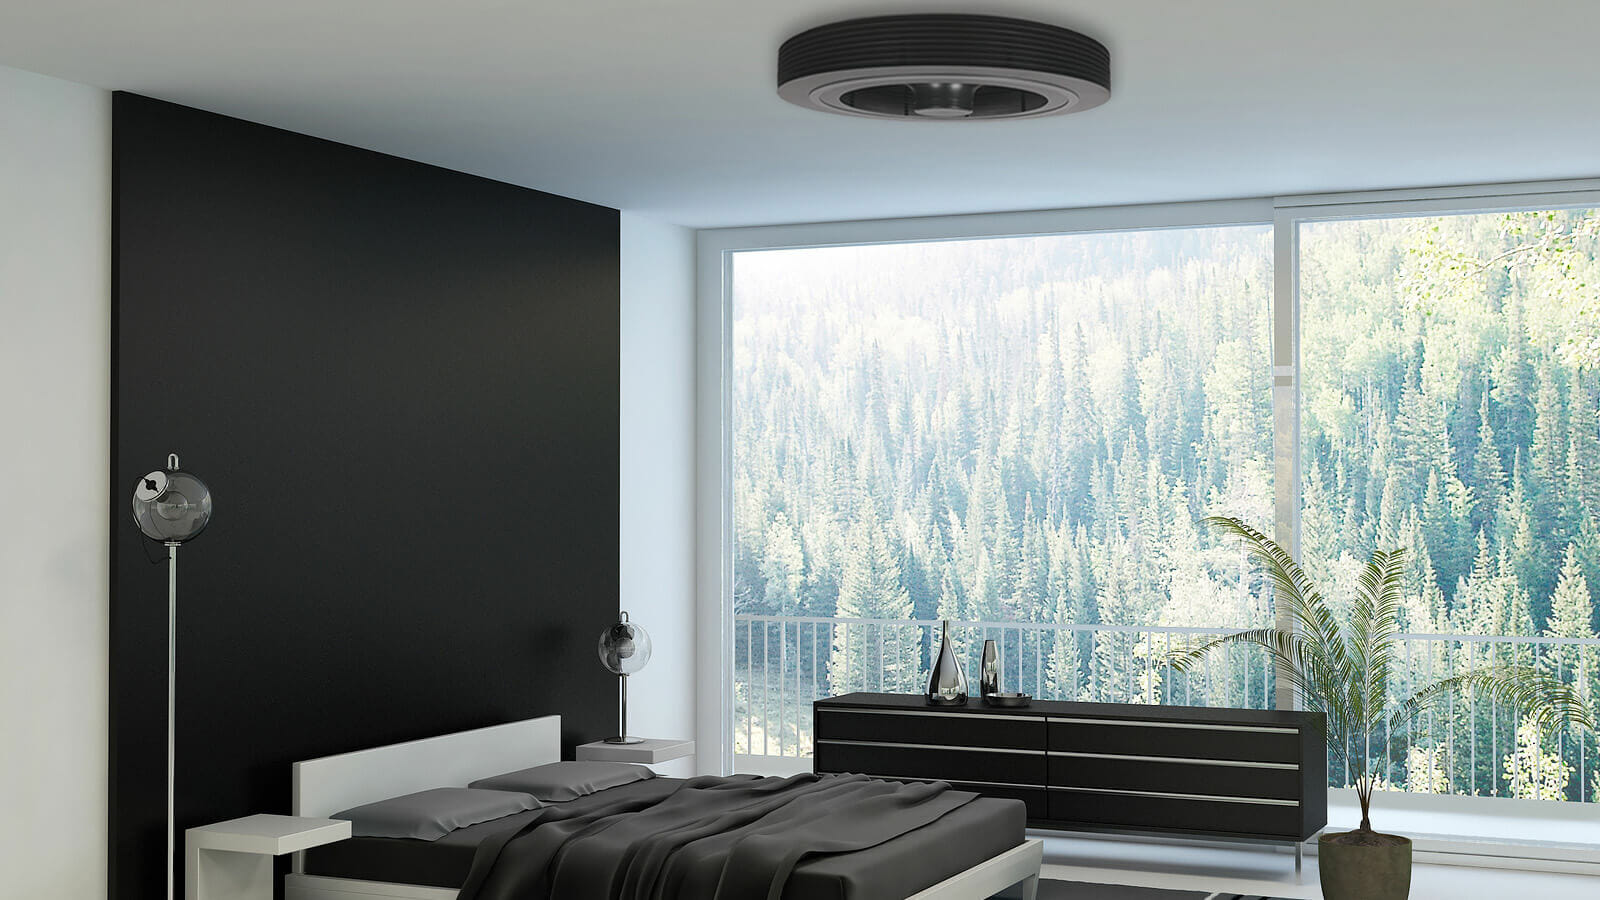 EXHALE INTRODUCES THE FIRST BLADELESS CEILING FAN!